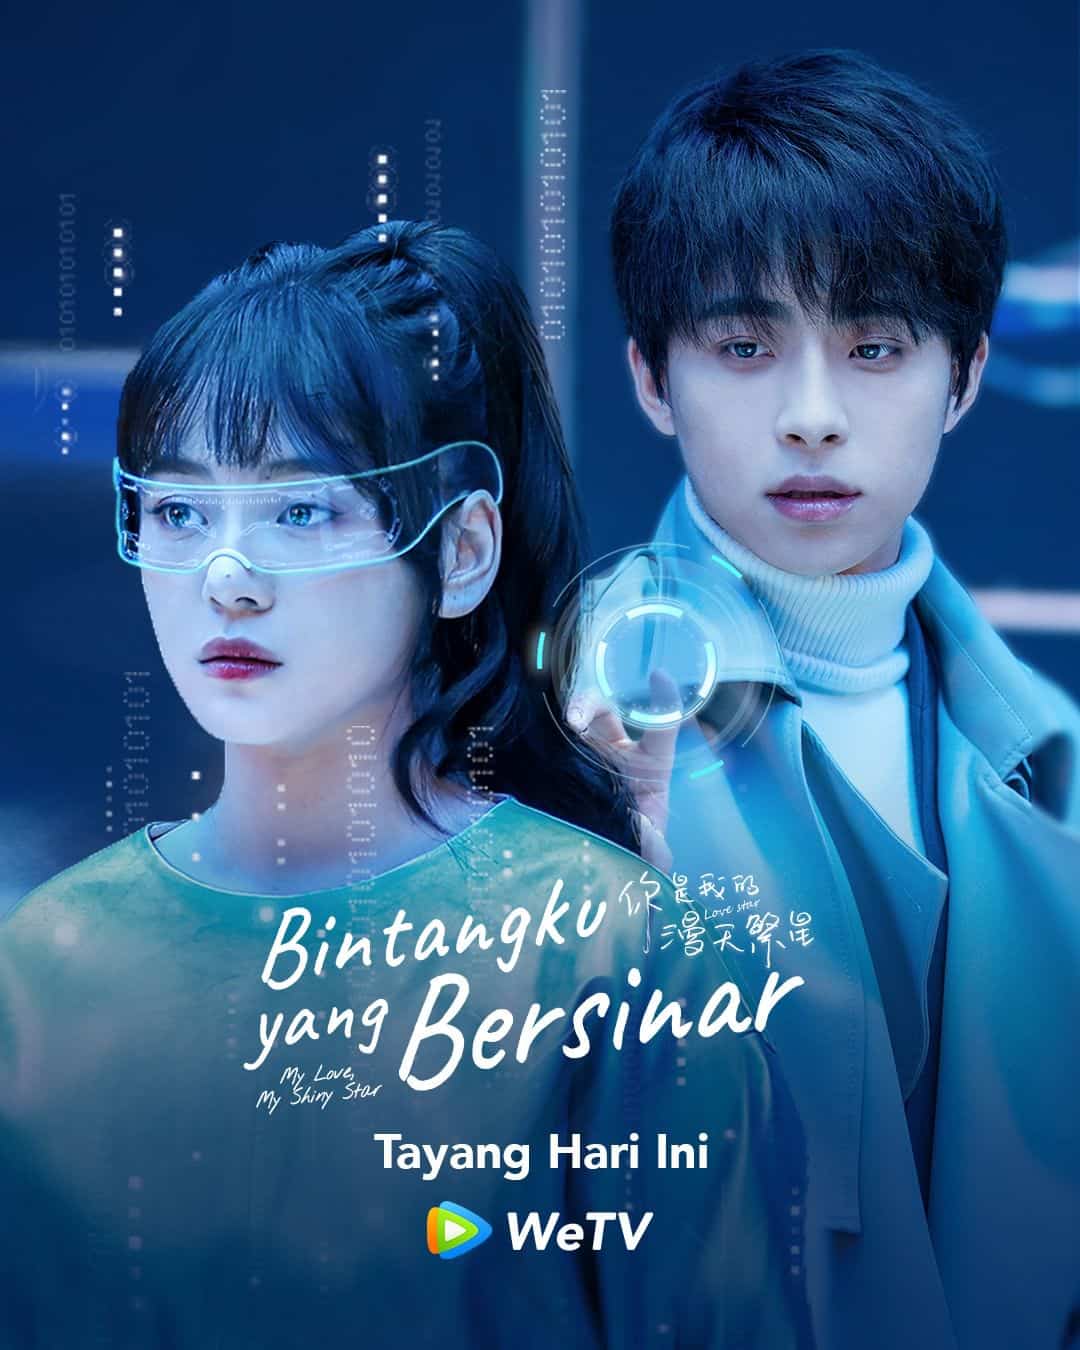 My Lover, My Shiny Stars - Sinopsis, Pemain, OST, Episode, Review